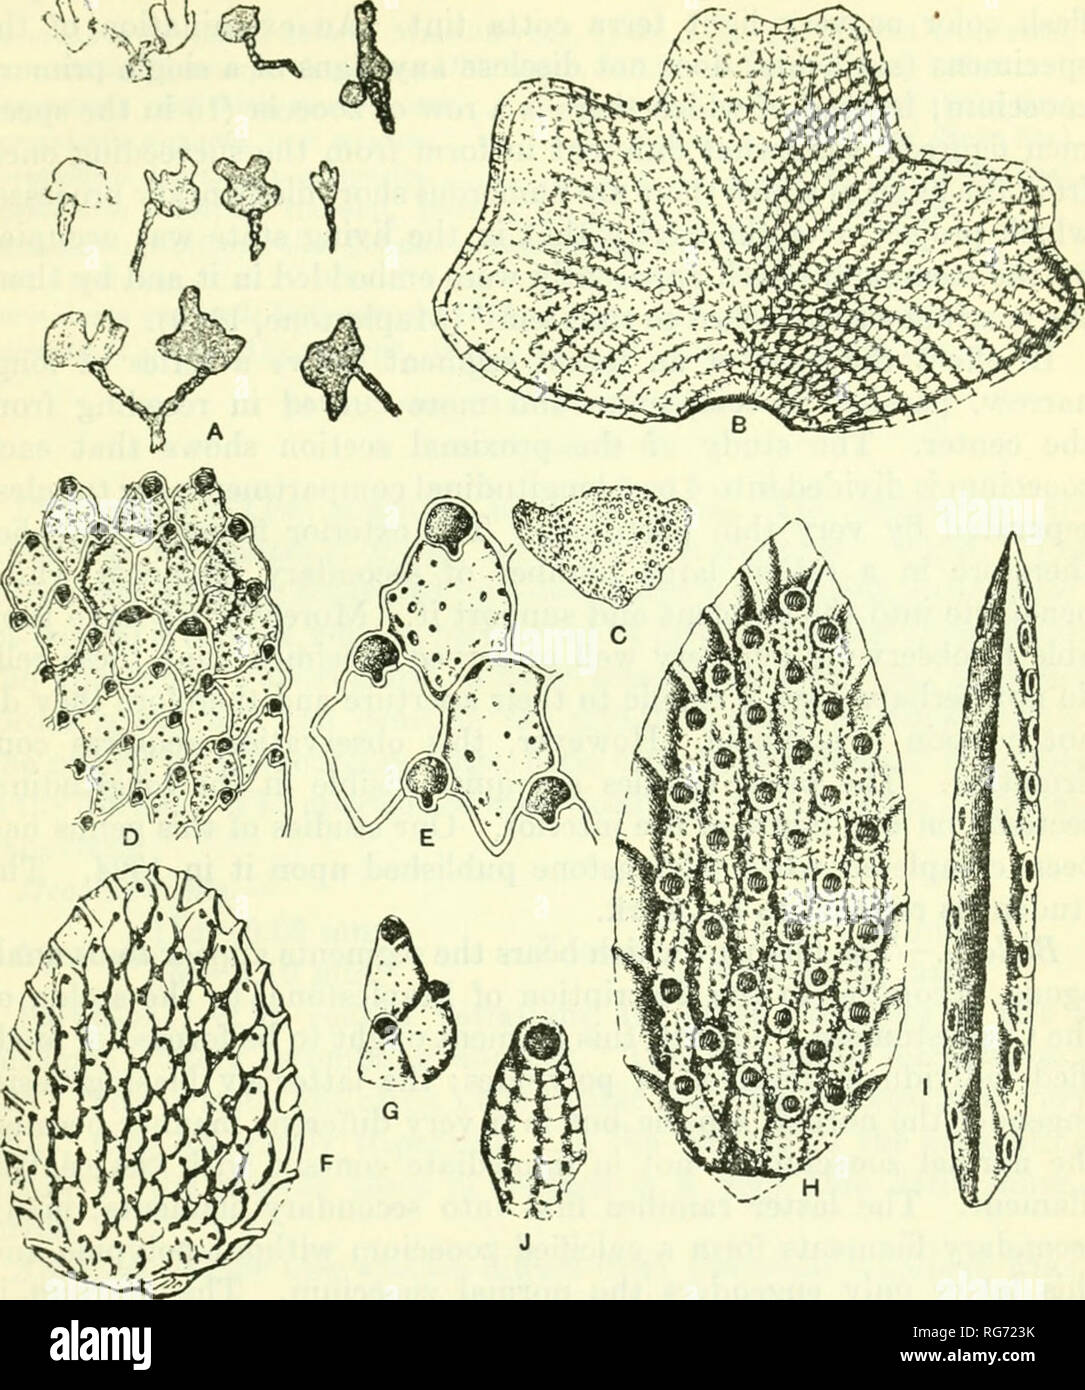 . Bulletin - United States National Museum. Science. BRYOZOA OF THE PHILIPPINE REGION 399 V $LS ^%. Fig. 155.—Genus Parmularia Maplestone, 1910 A-E. Parmularia obliqua MacGillivray, 1868. A. Stoloniferous zoaria X0.5. The segments attached to the extremity of the stolons are bilamellar. B. A sym- metrical segment, X8 (A, B. After Maplestone, 1910, 1913) C, D, E. A zoarial fragment (C) showing the form of the zooecia. (D, E. After MacGillivray, 1880.) F, G. Parmularia flabellata Maplestone, 1901. Segment enlarged and zooecia further magnified. (After Maplestone, 1901.) H-J. Parmularia (Lanceop Stock Photo